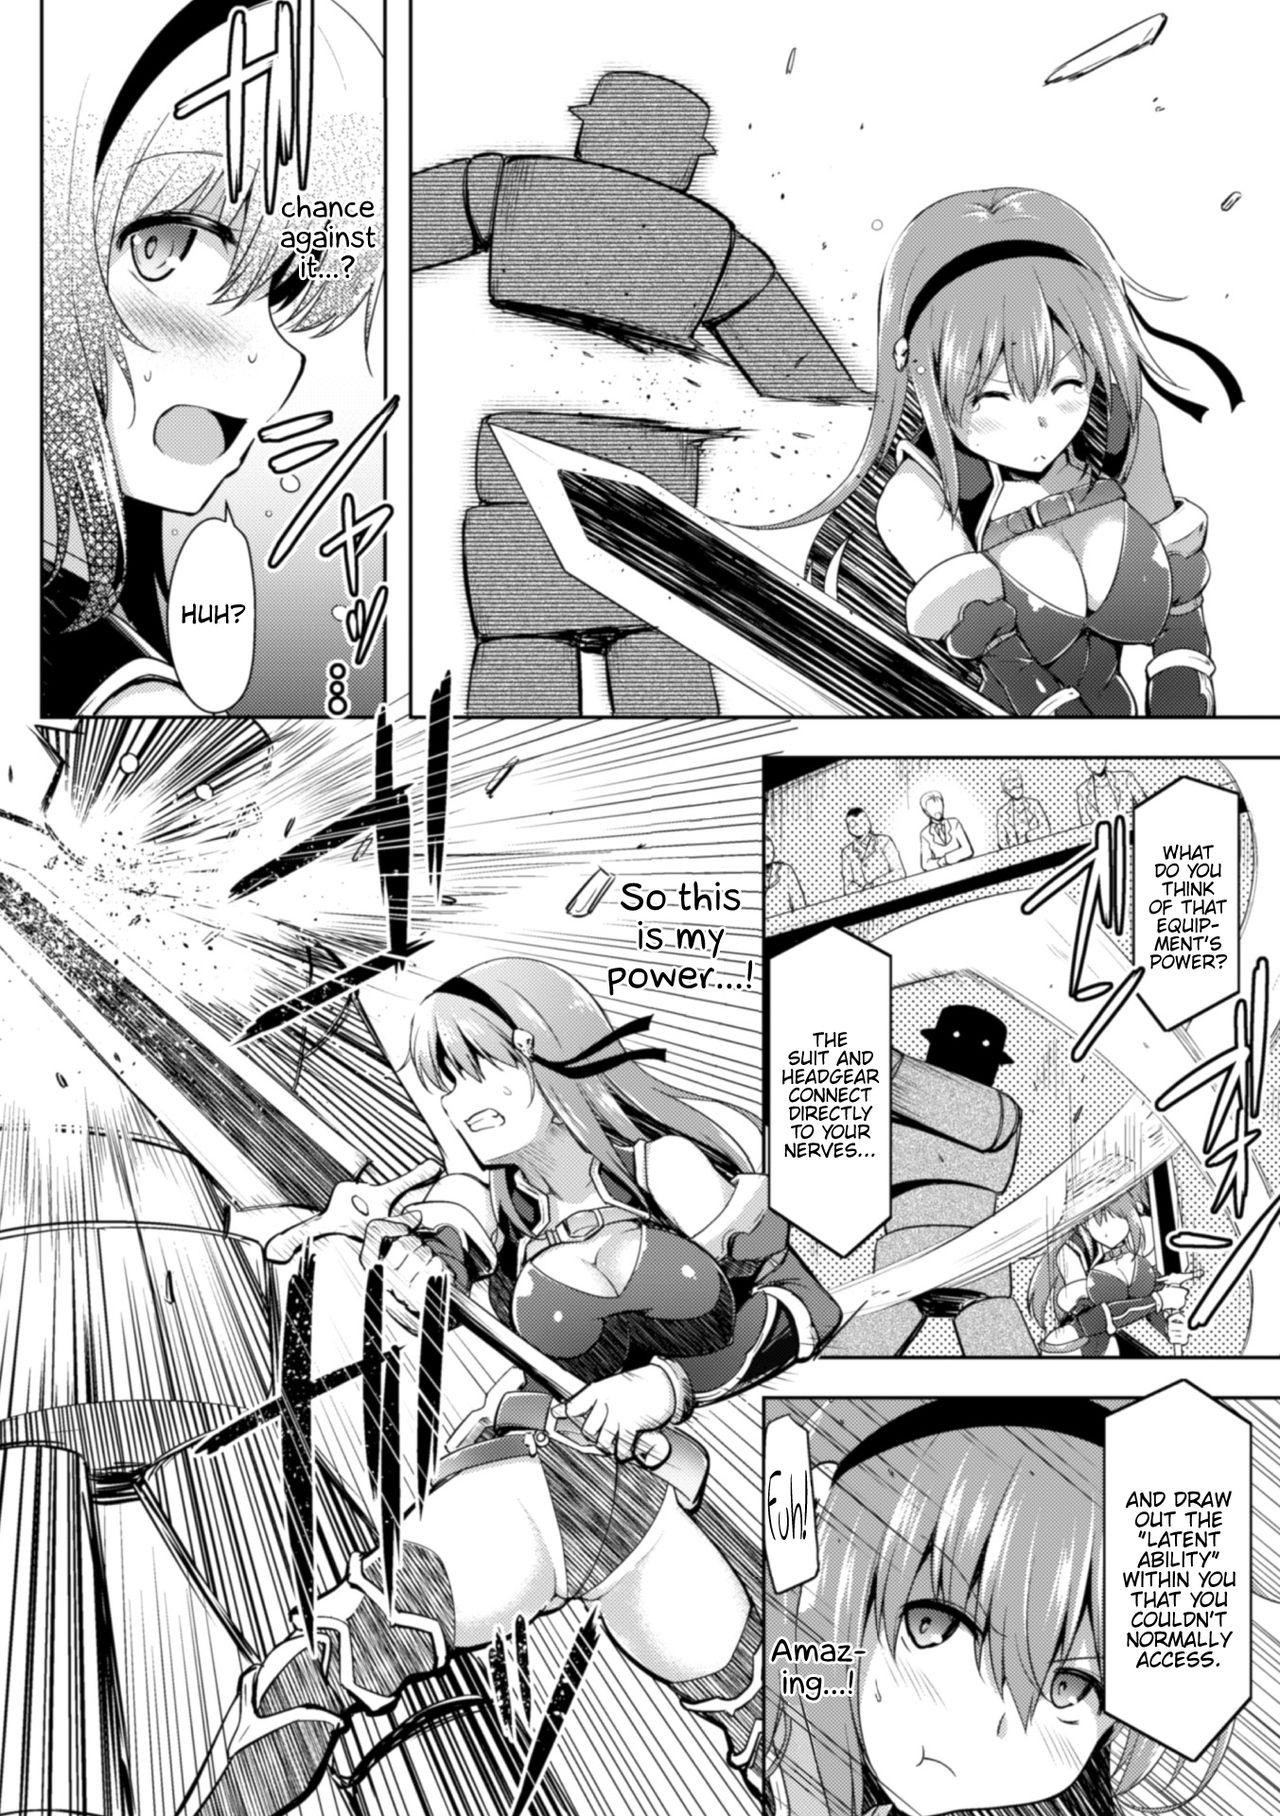 Thot Isshou Solo Play Jerkoff - Page 8